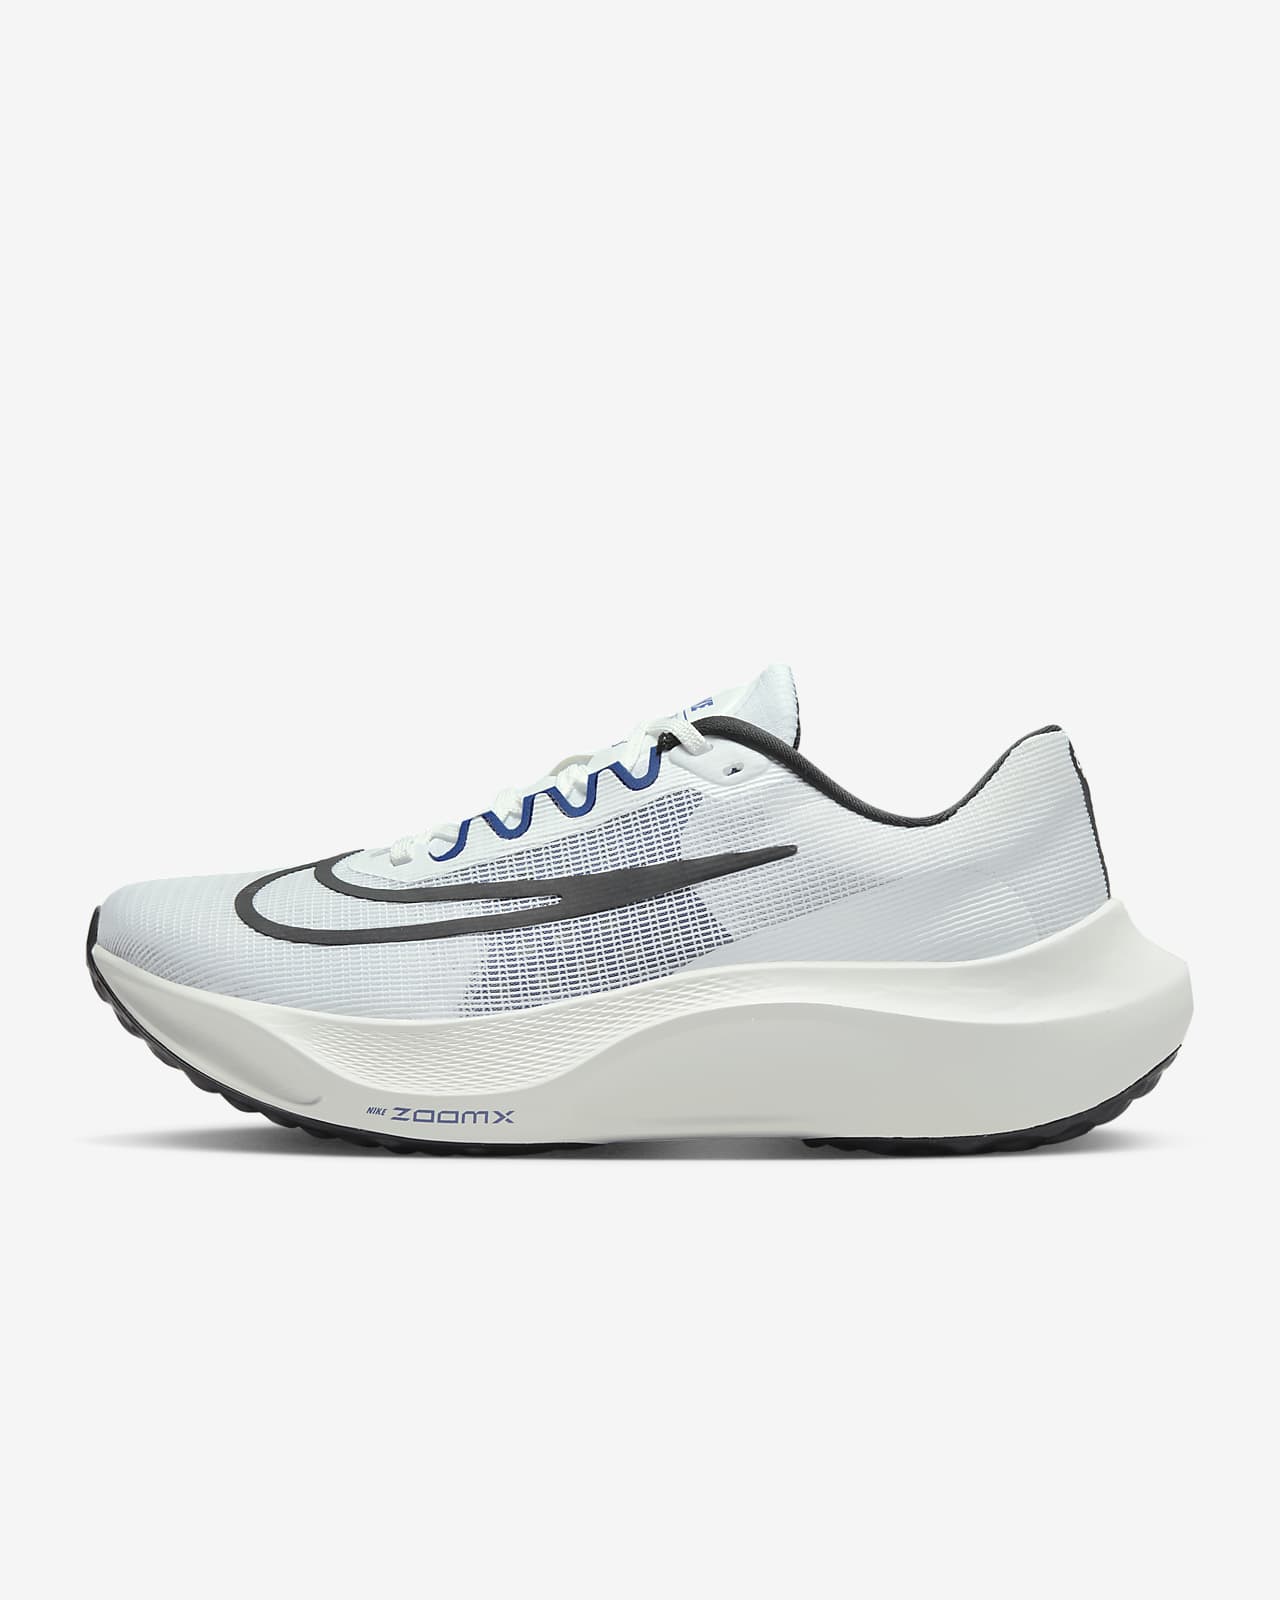 nike zoom fly men's running shoes